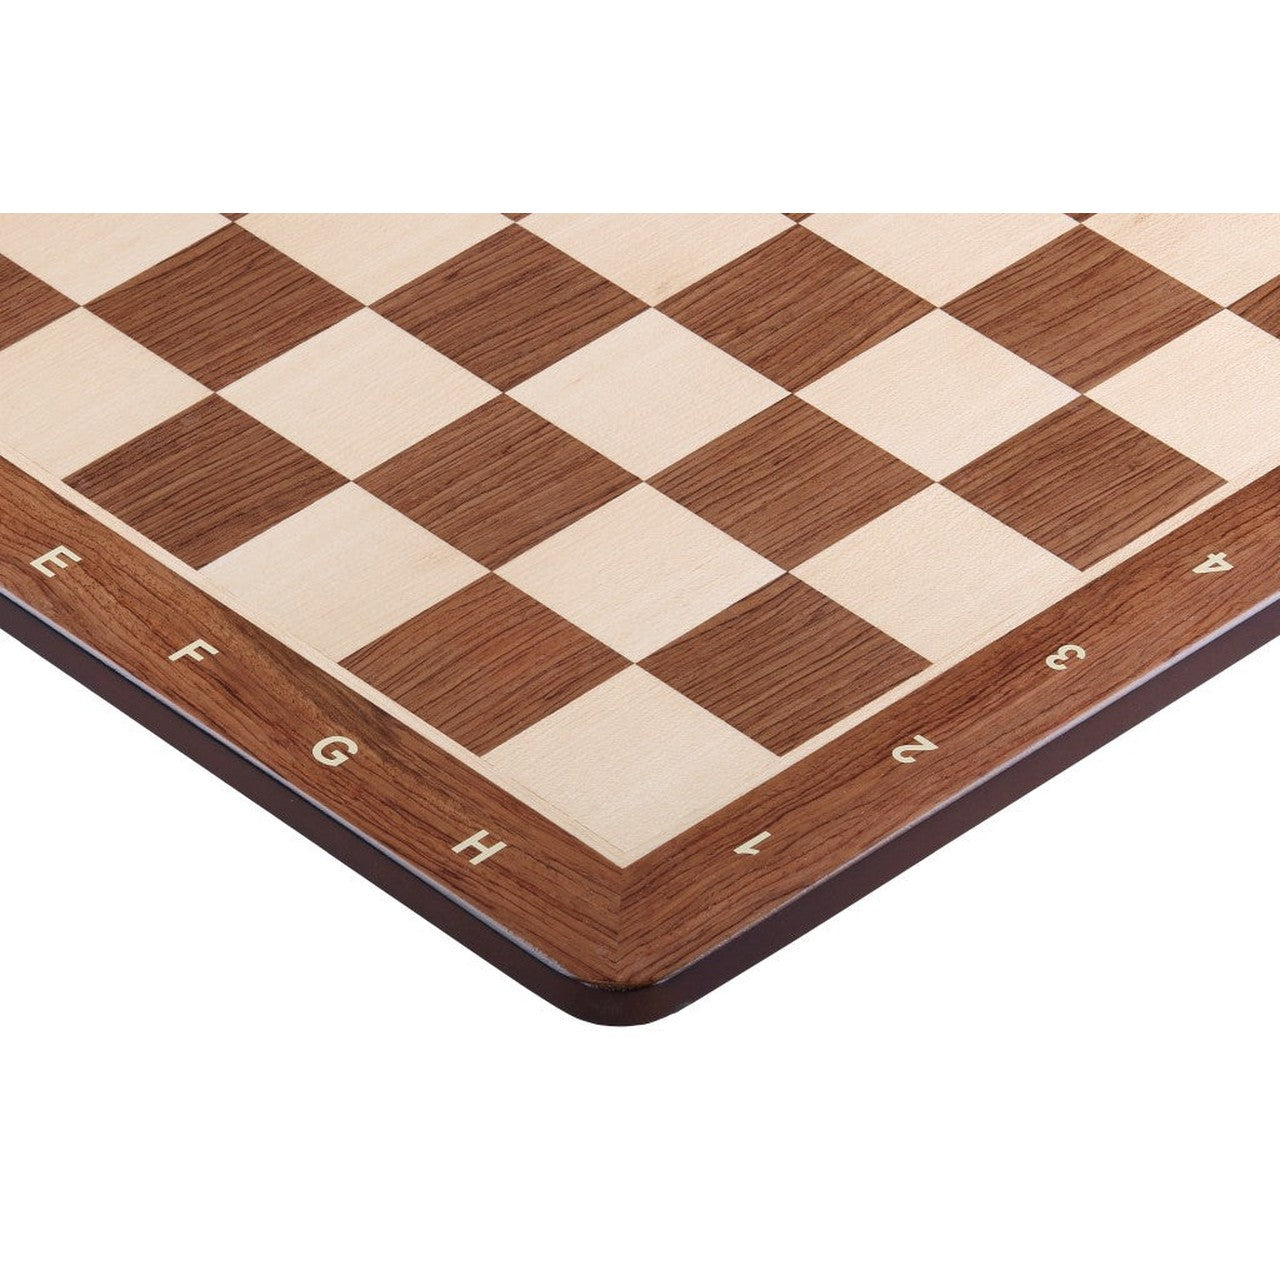 Chess Board ROUNDED